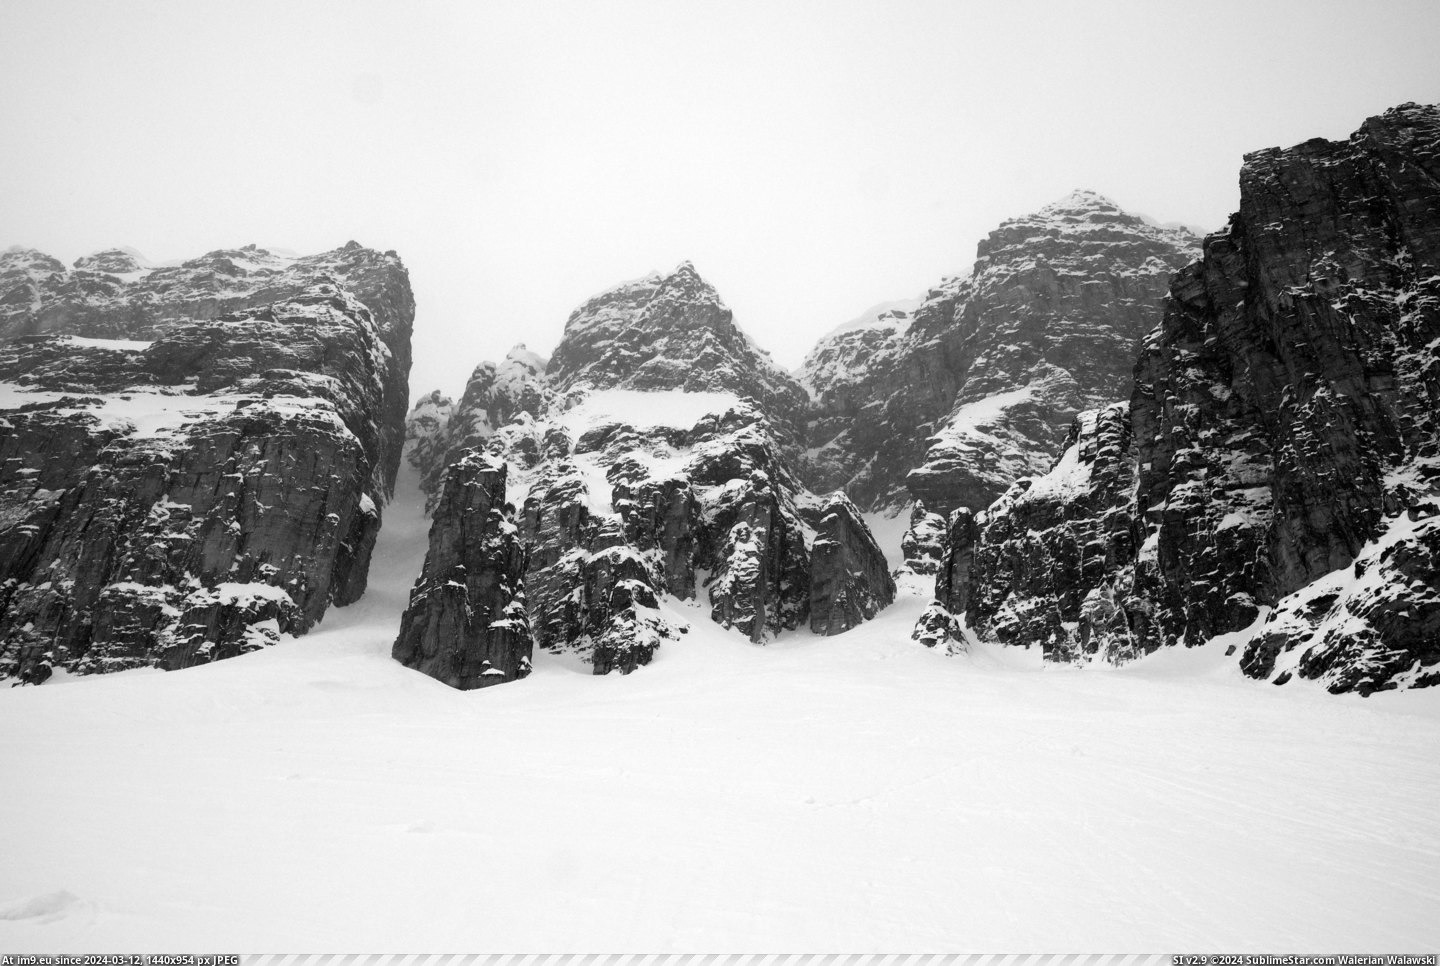 #Black #Photos #Daddy #Case #Rarely #White #Grand [Earthporn] I rarely see black and white photos here, but in this case I think it's appropriate. The Grand Daddy Couloir in Banf Pic. (Bild von album My r/EARTHPORN favs))